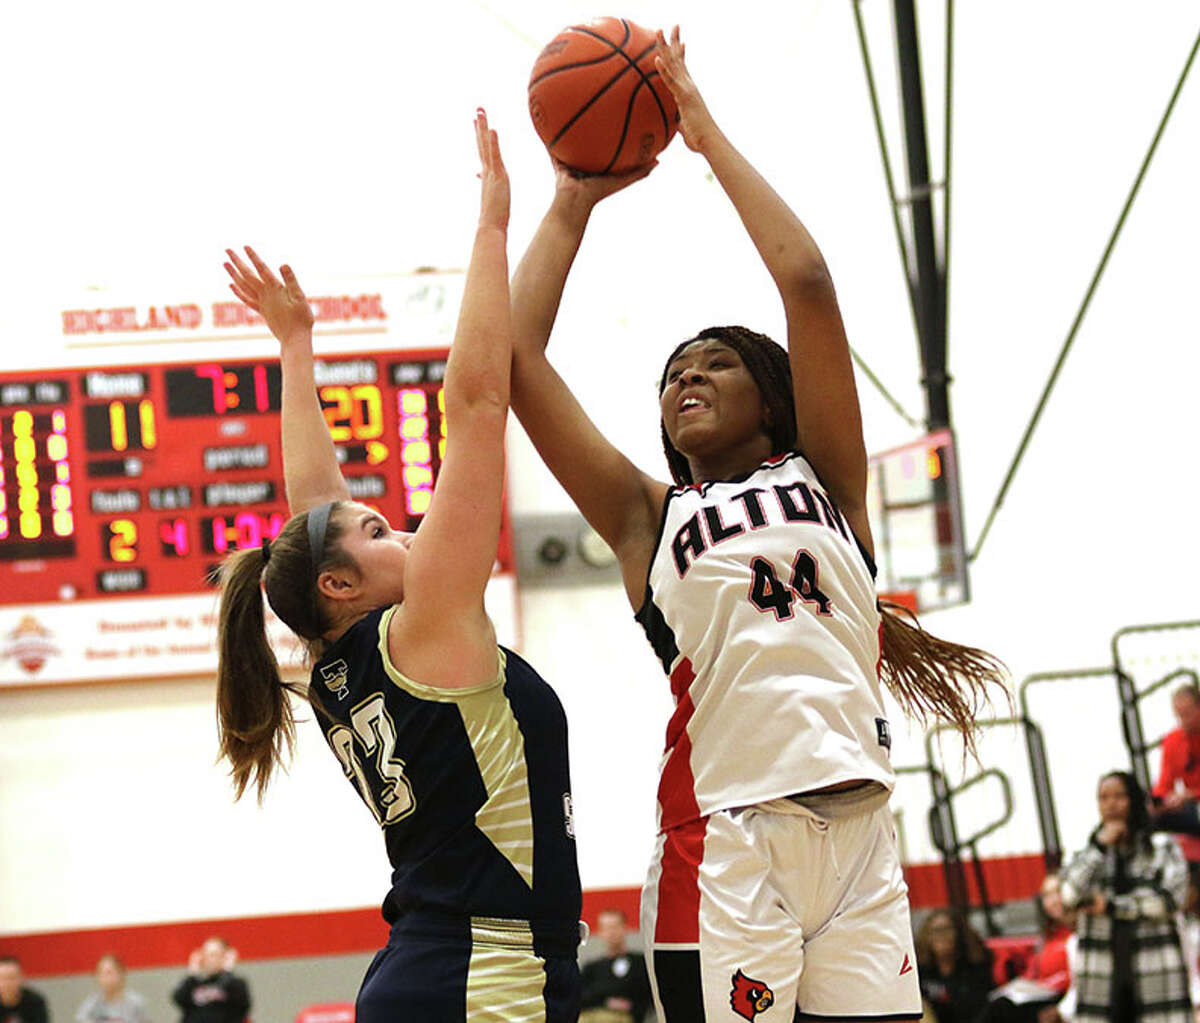 Alton's Jarius Powers (44) shoots over Teutopolis' Kaylee Niebrugge in a game at the Highland Tournament in January. The Redbirds moved their record to 30-1 Tuesday with a win over Granite City in the Alton Class 4A Regional.